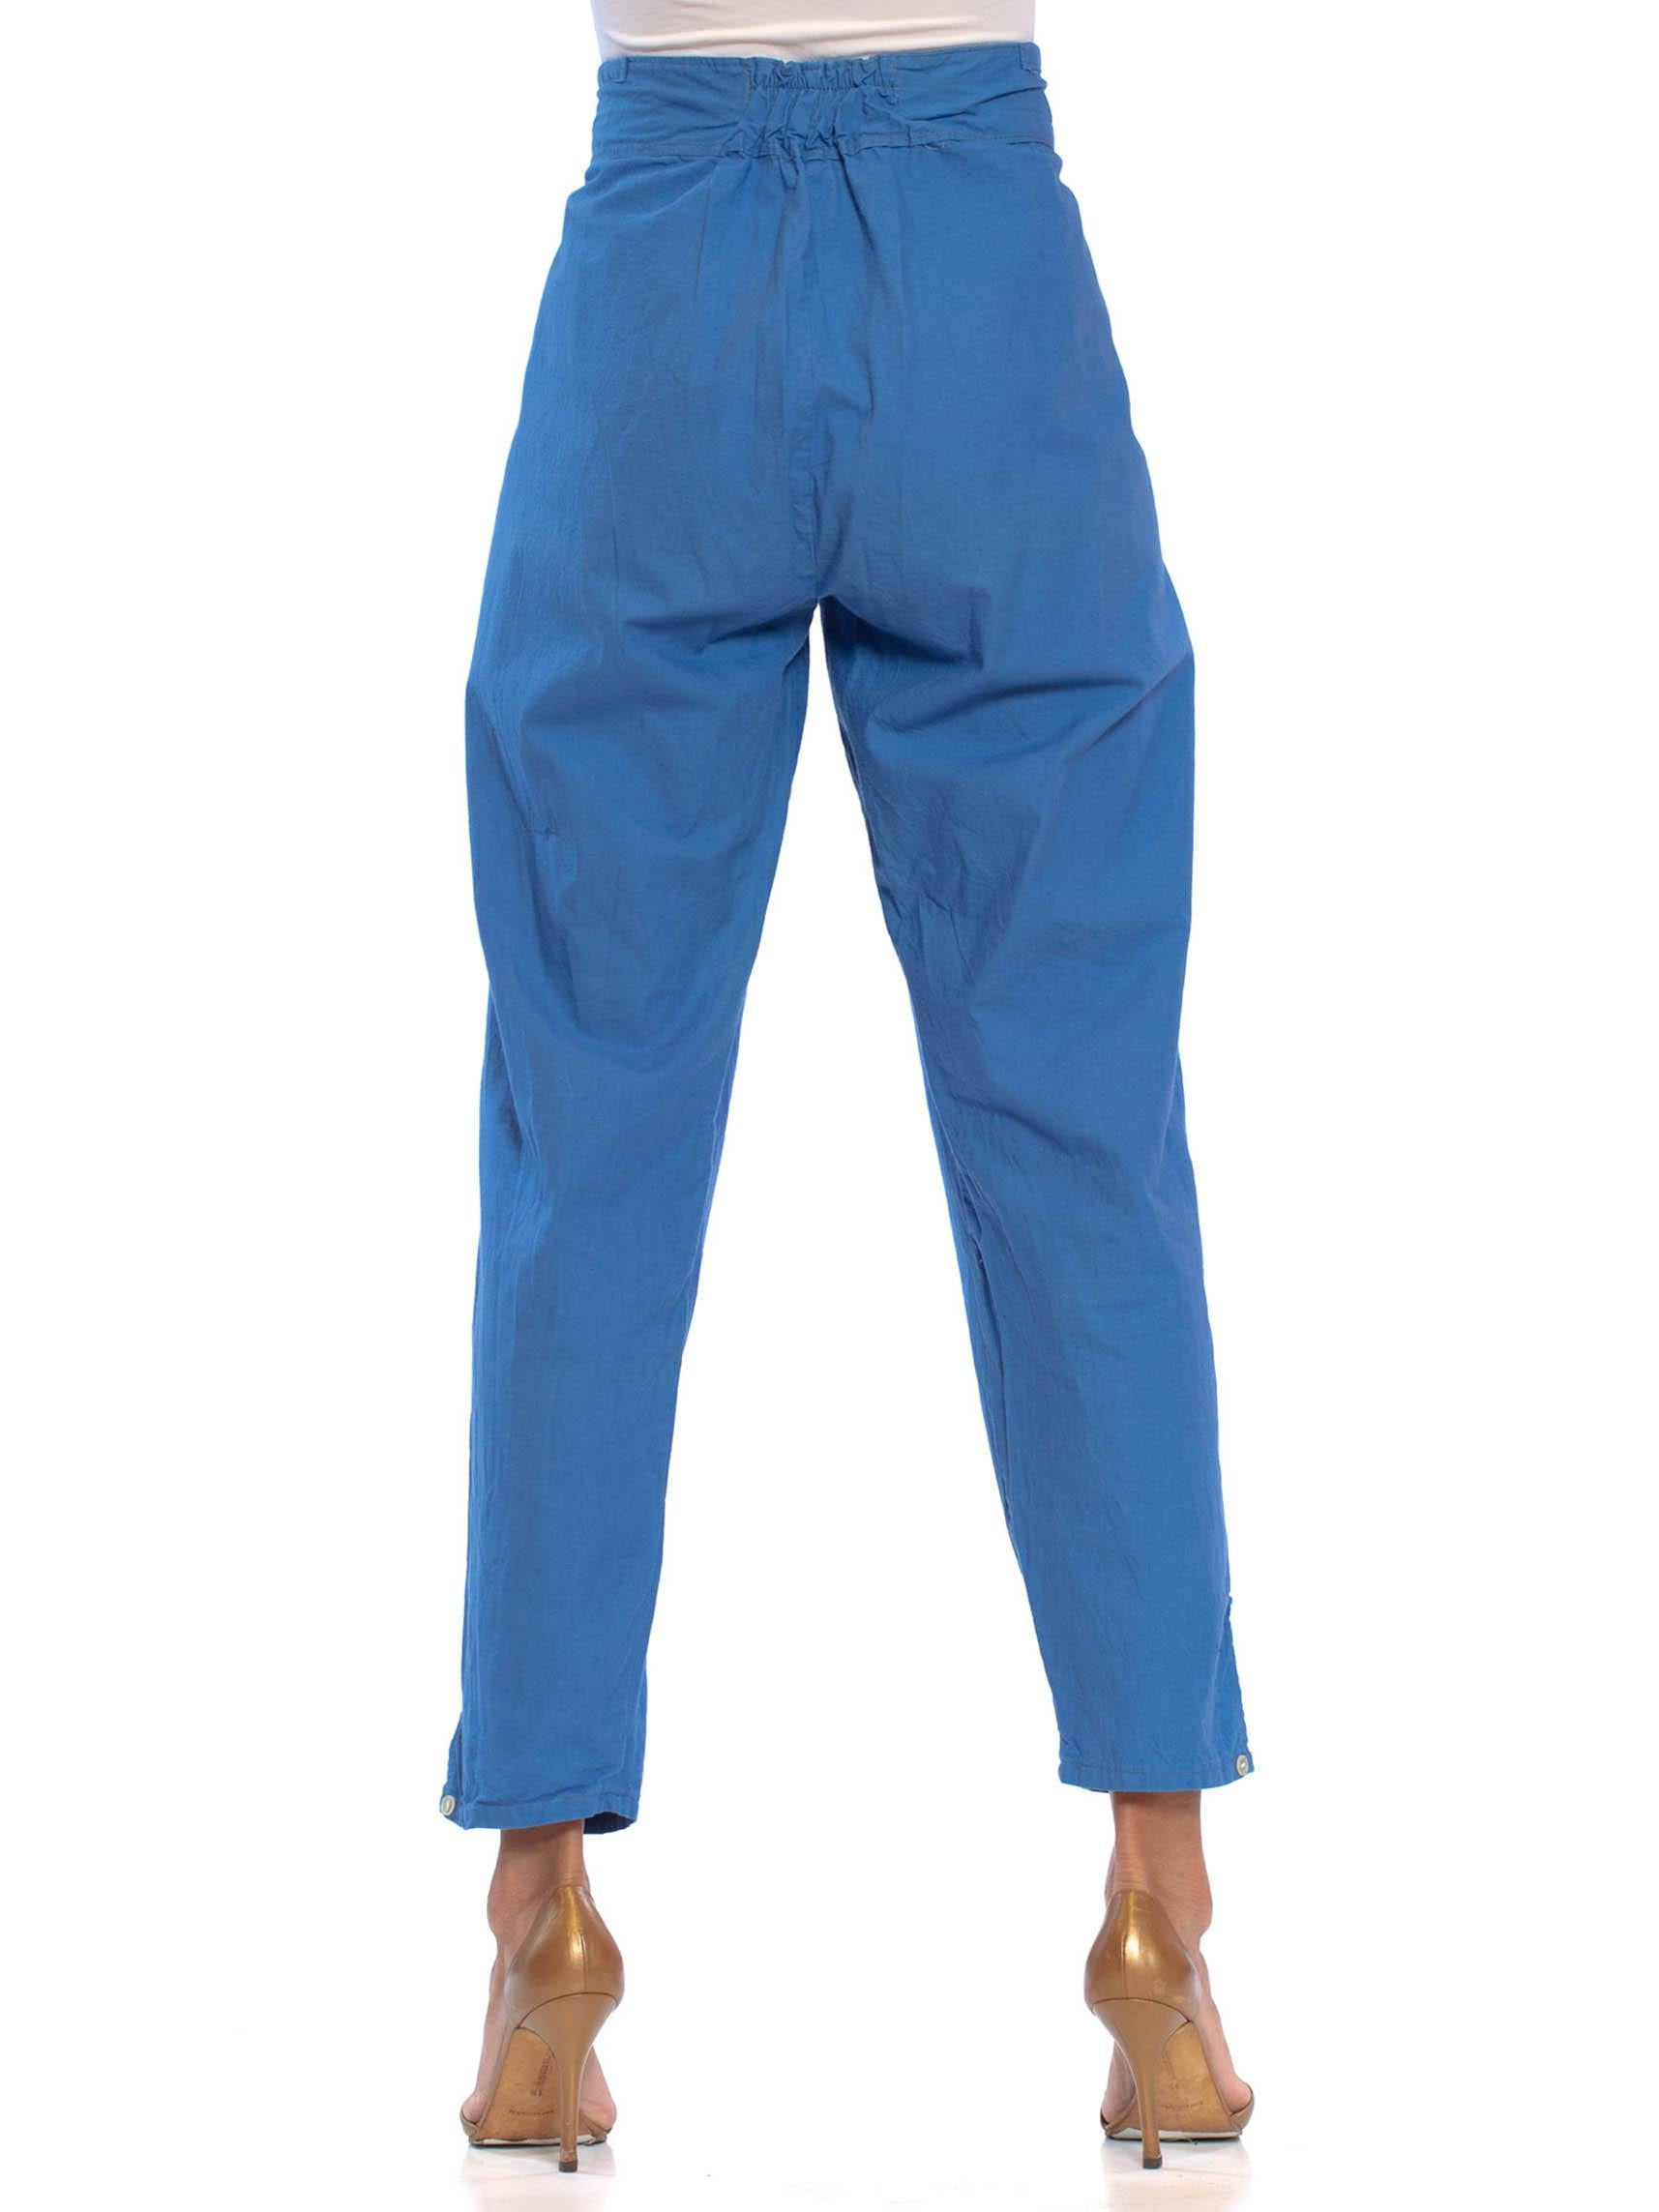 Women's or Men's 1960S French Blue Cotton Pajama Style Lounge Pants For Sale